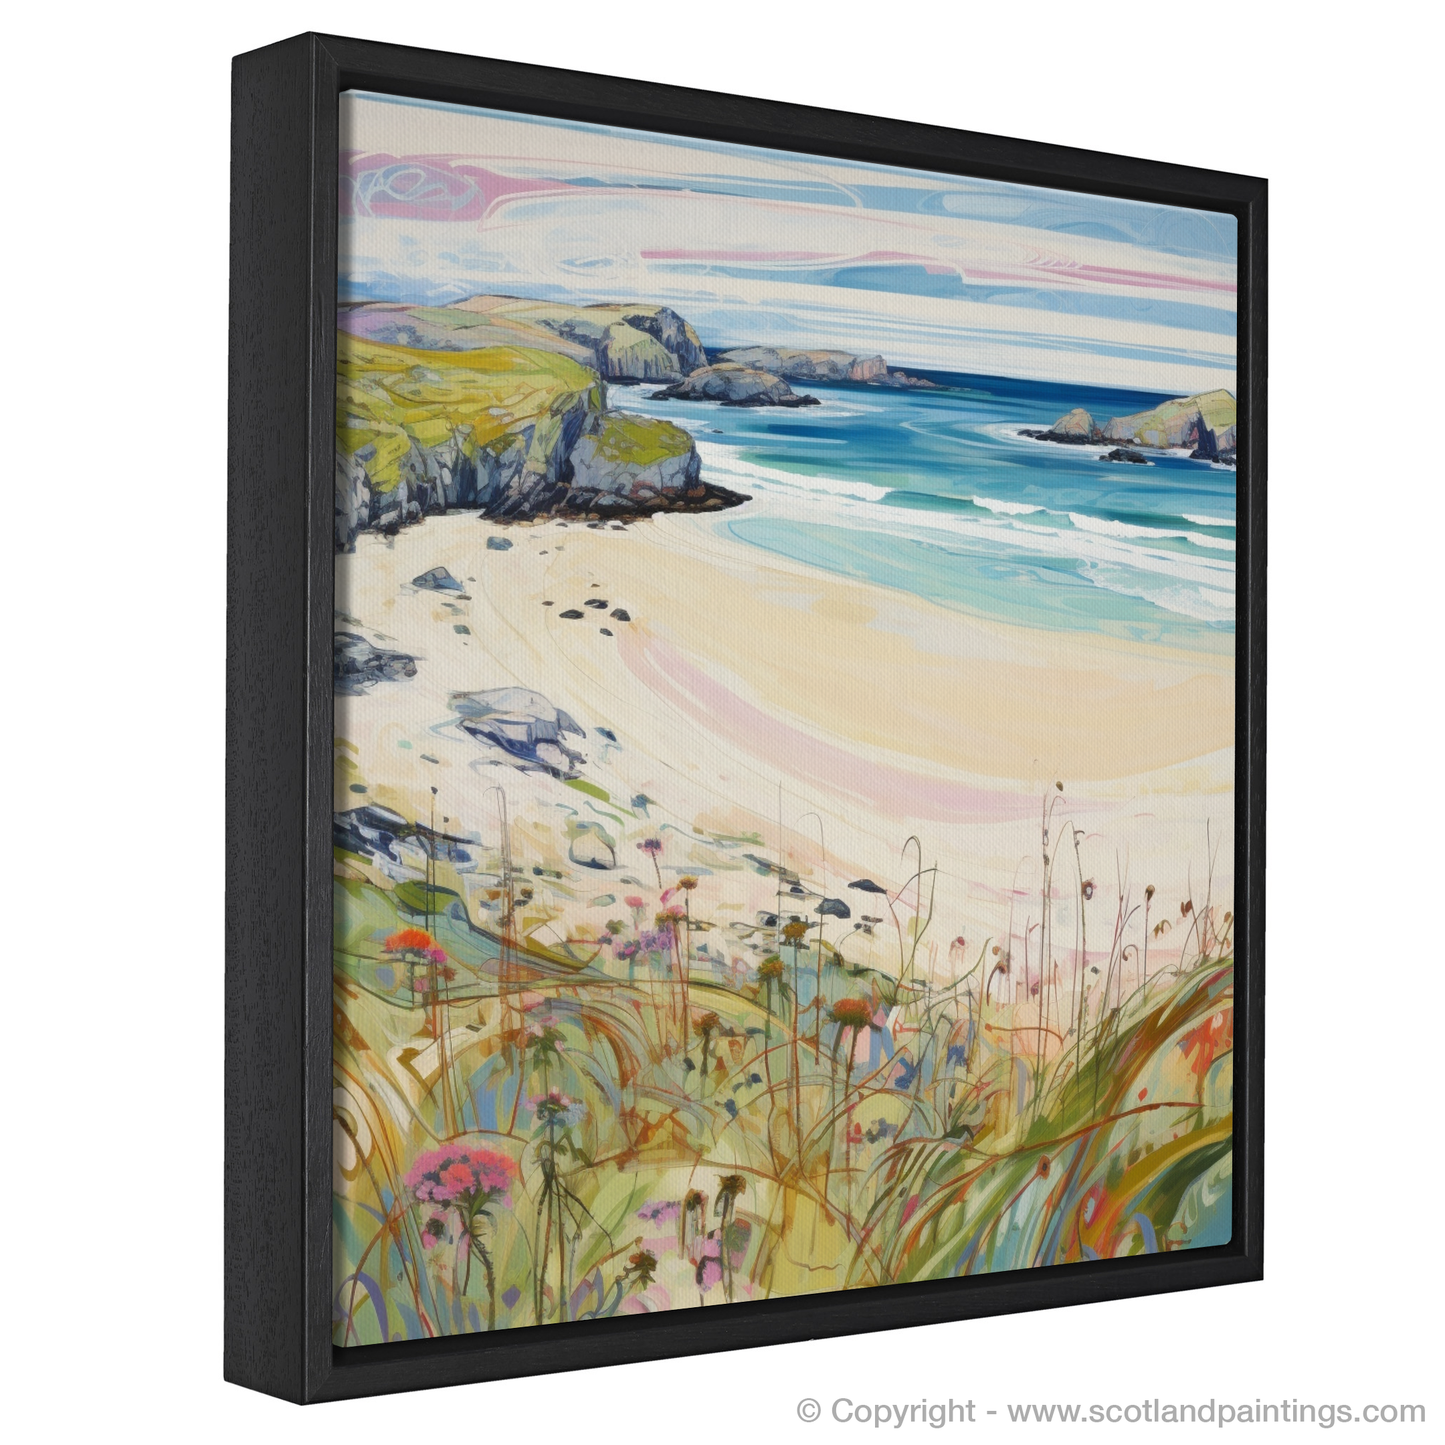 Painting and Art Print of Durness Beach, Sutherland in summer entitled "Summer Serenade at Durness Beach Sutherland".